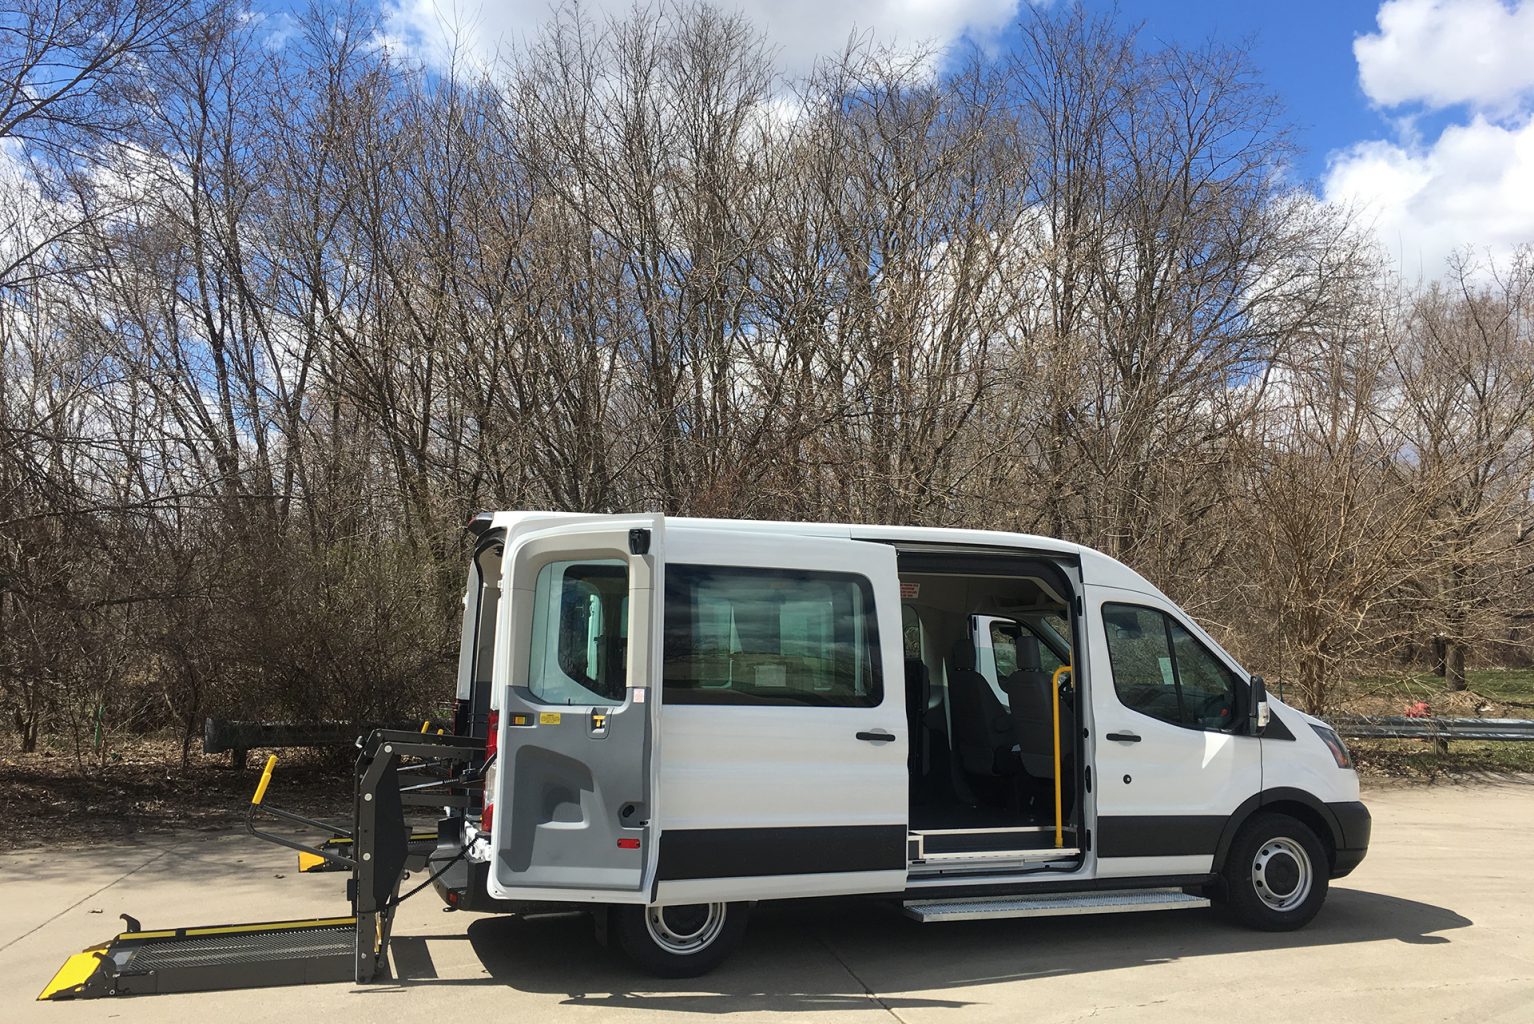 ADA Accessible Vans with their lift gates on the ground